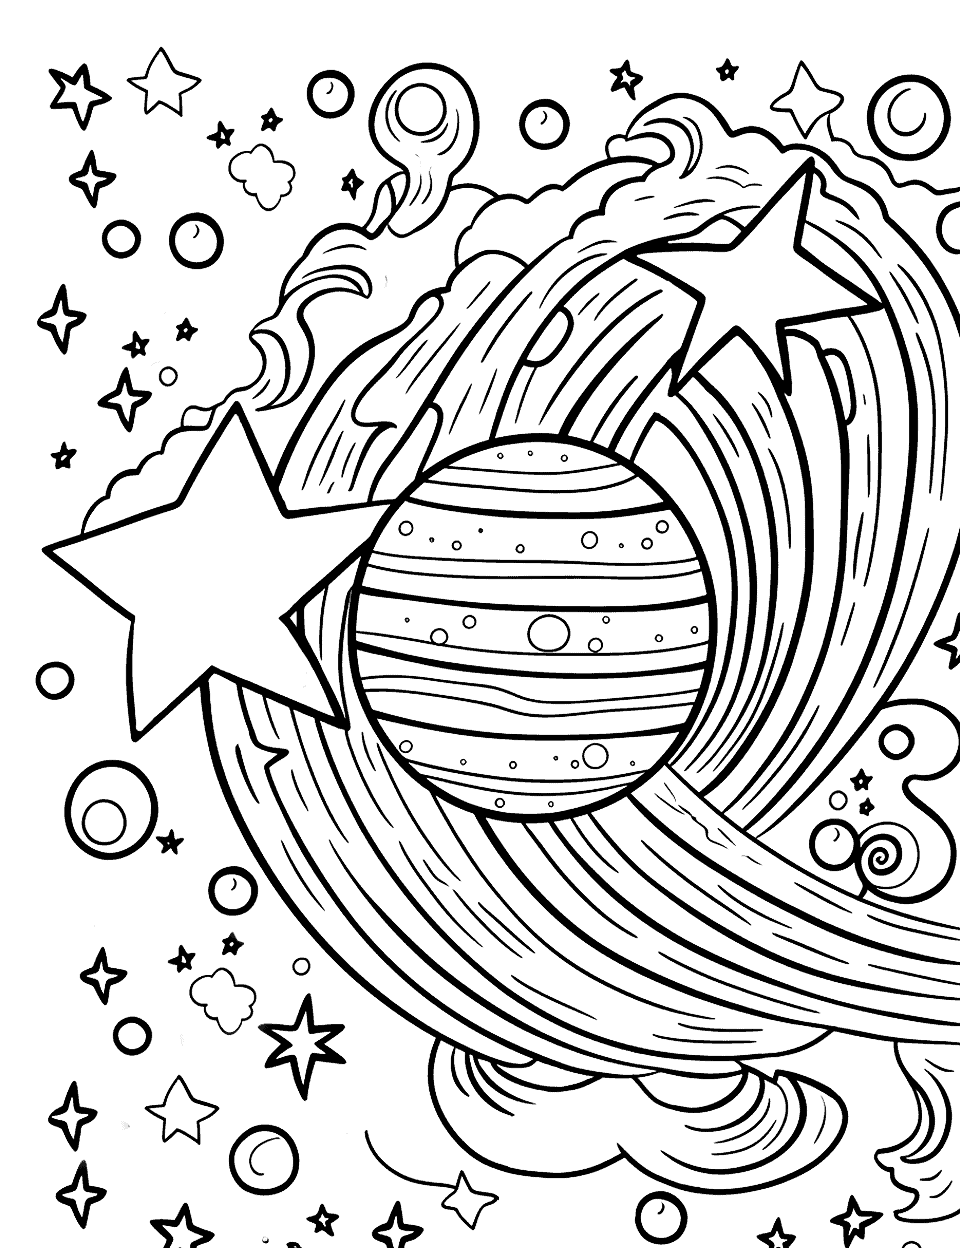 Trippy Space Journey Adult Coloring Page - A psychedelic journey through space with abstract planets, stars, and galaxies.